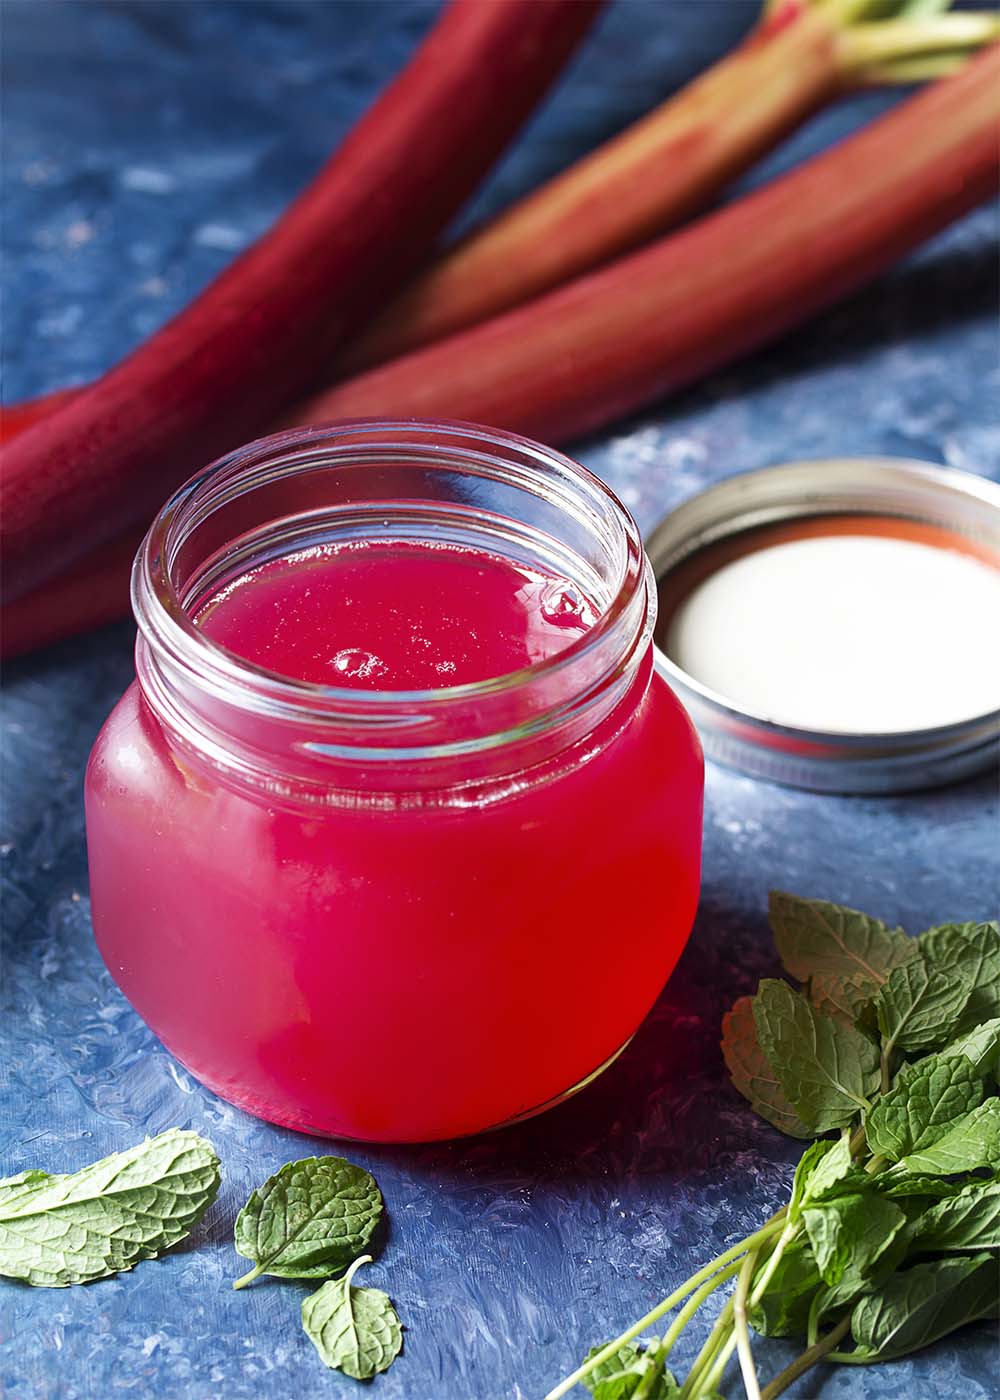 A glass jar of rhubarb syrup showing the deep pink color of the syrup.